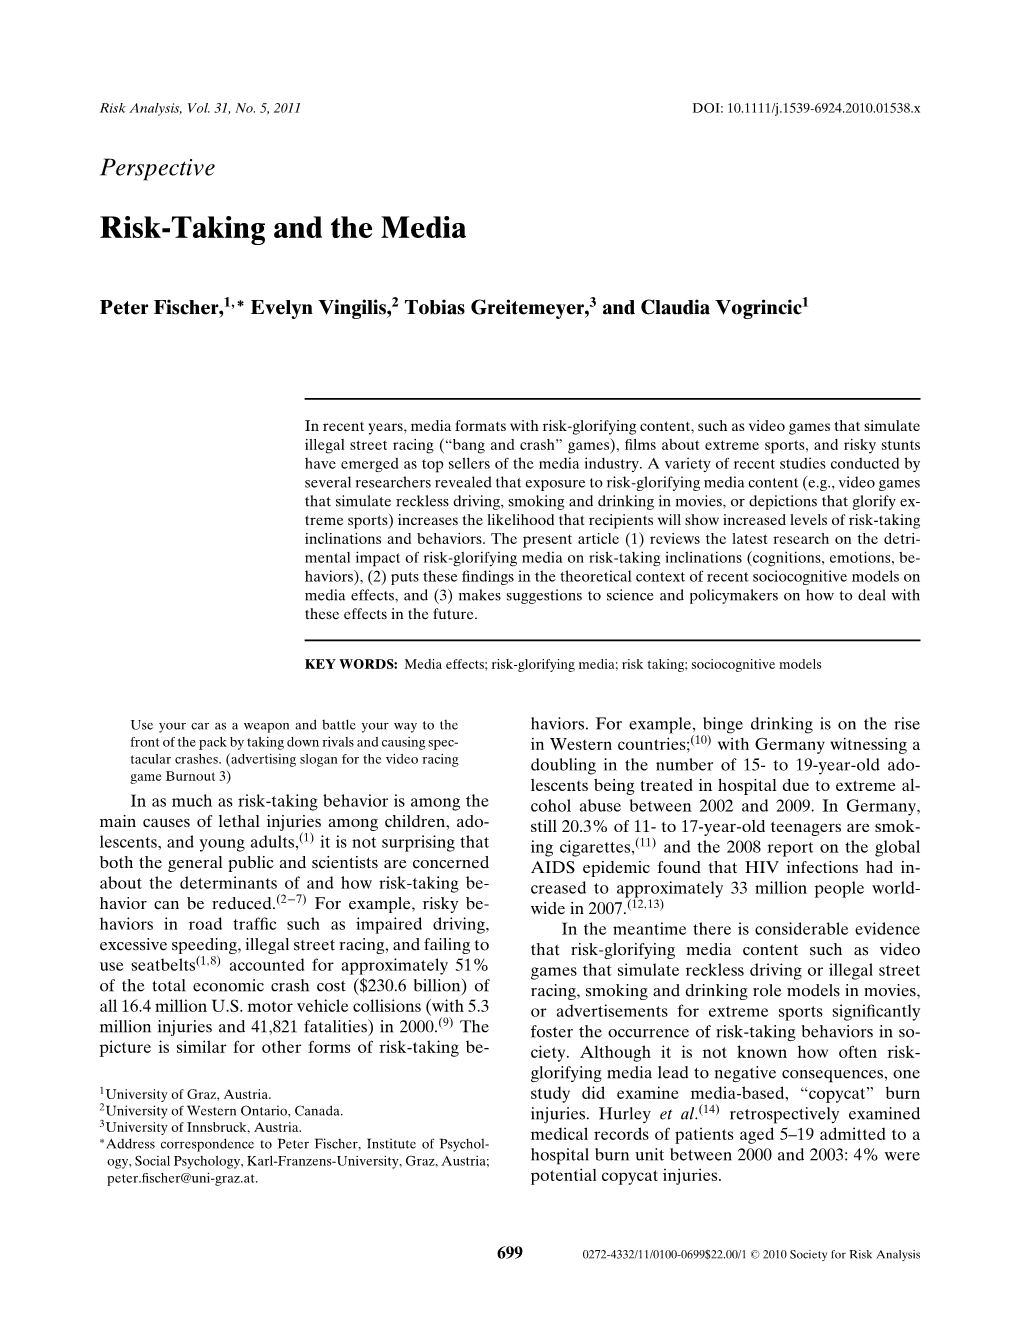 Risk-Taking and the Media